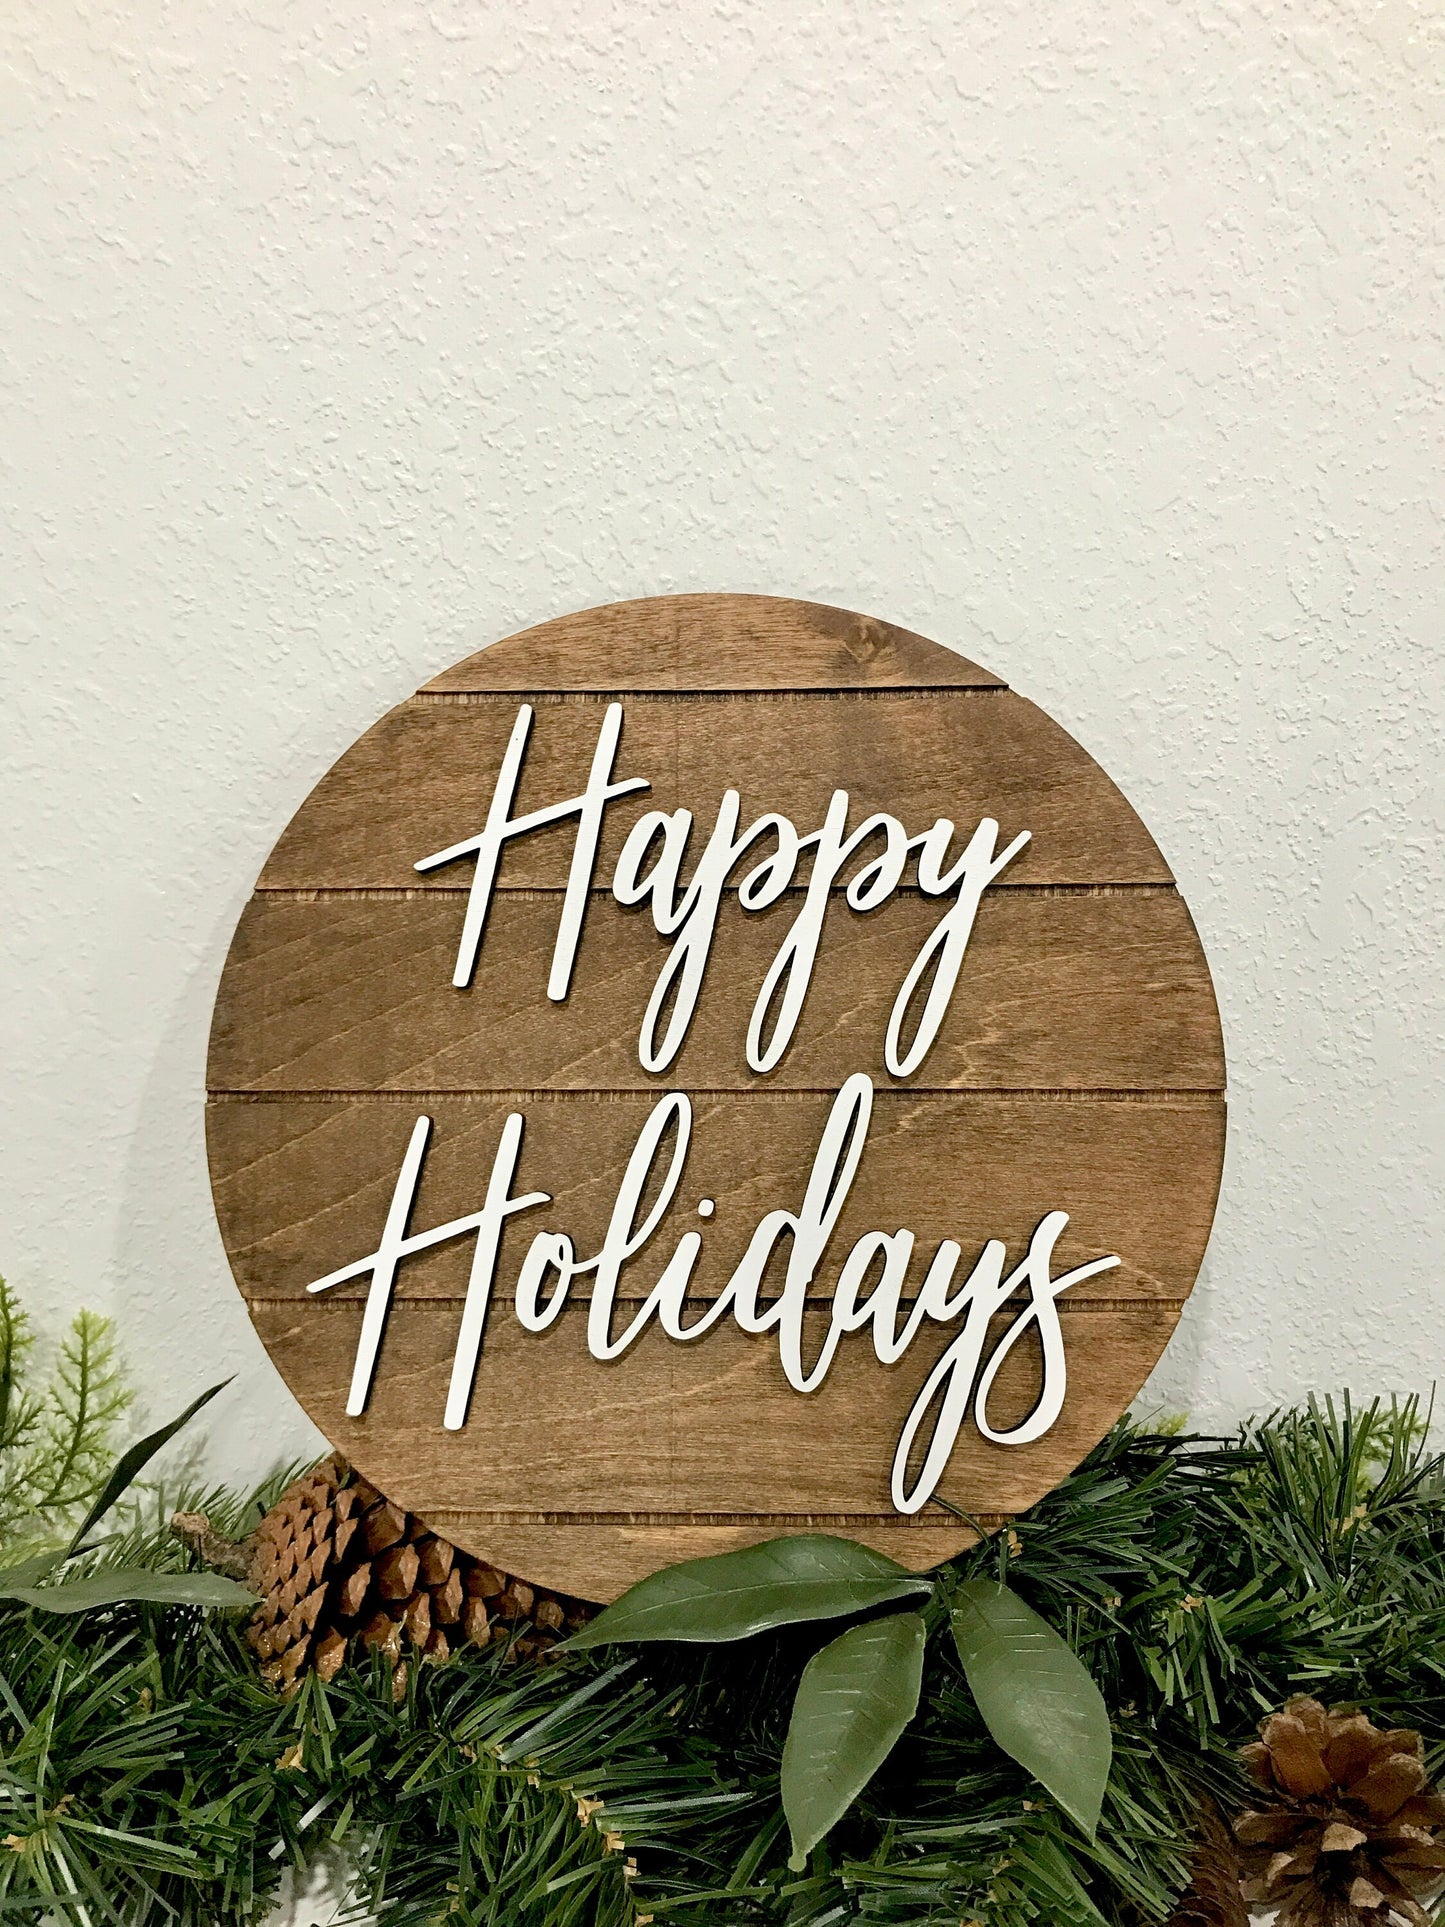 Merry Christmas sign, Christmas decorations, 3D holiday decor, shiplap wood signs, living room wooden sign wall hanging, rustic mantel decor